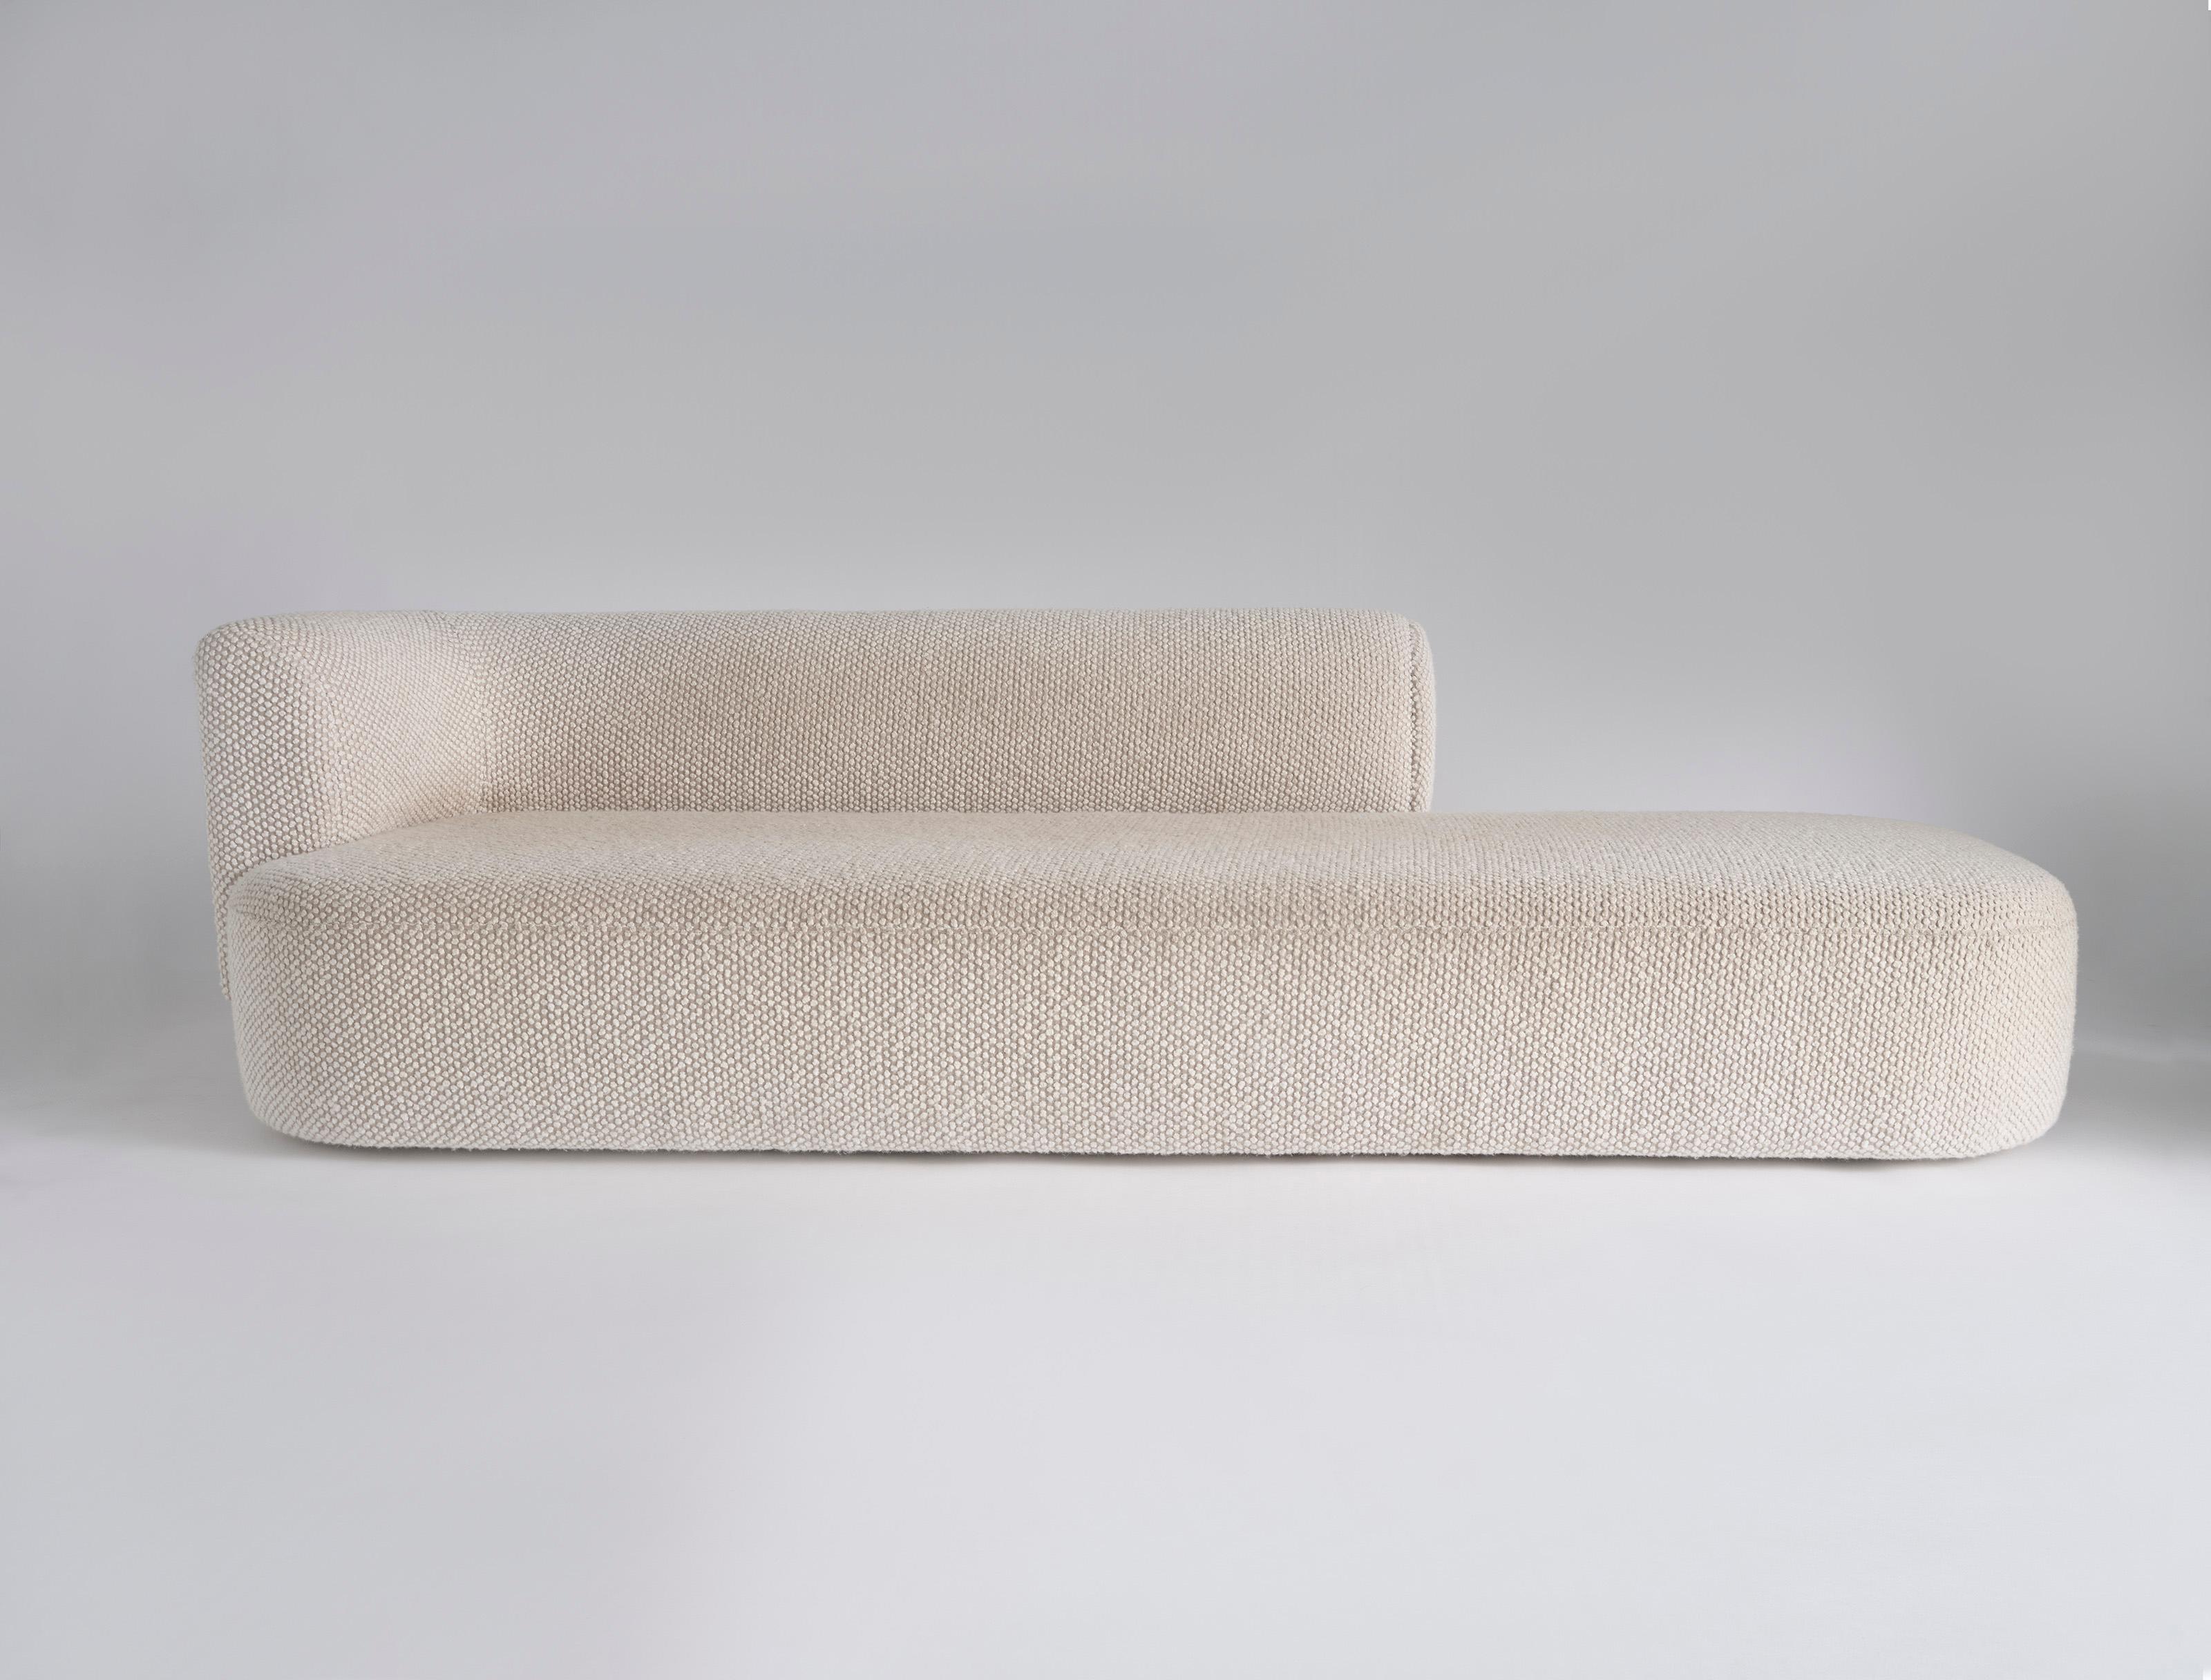 Listed price is for the capper sofa and comfort zone by HBF fabric. 
COM is also available, with a List price of $ 6,670.00.

Prices exclude packing. 

Inspired by the warmth of a hug, Capper’s design and construction envelopes you in coziness, for